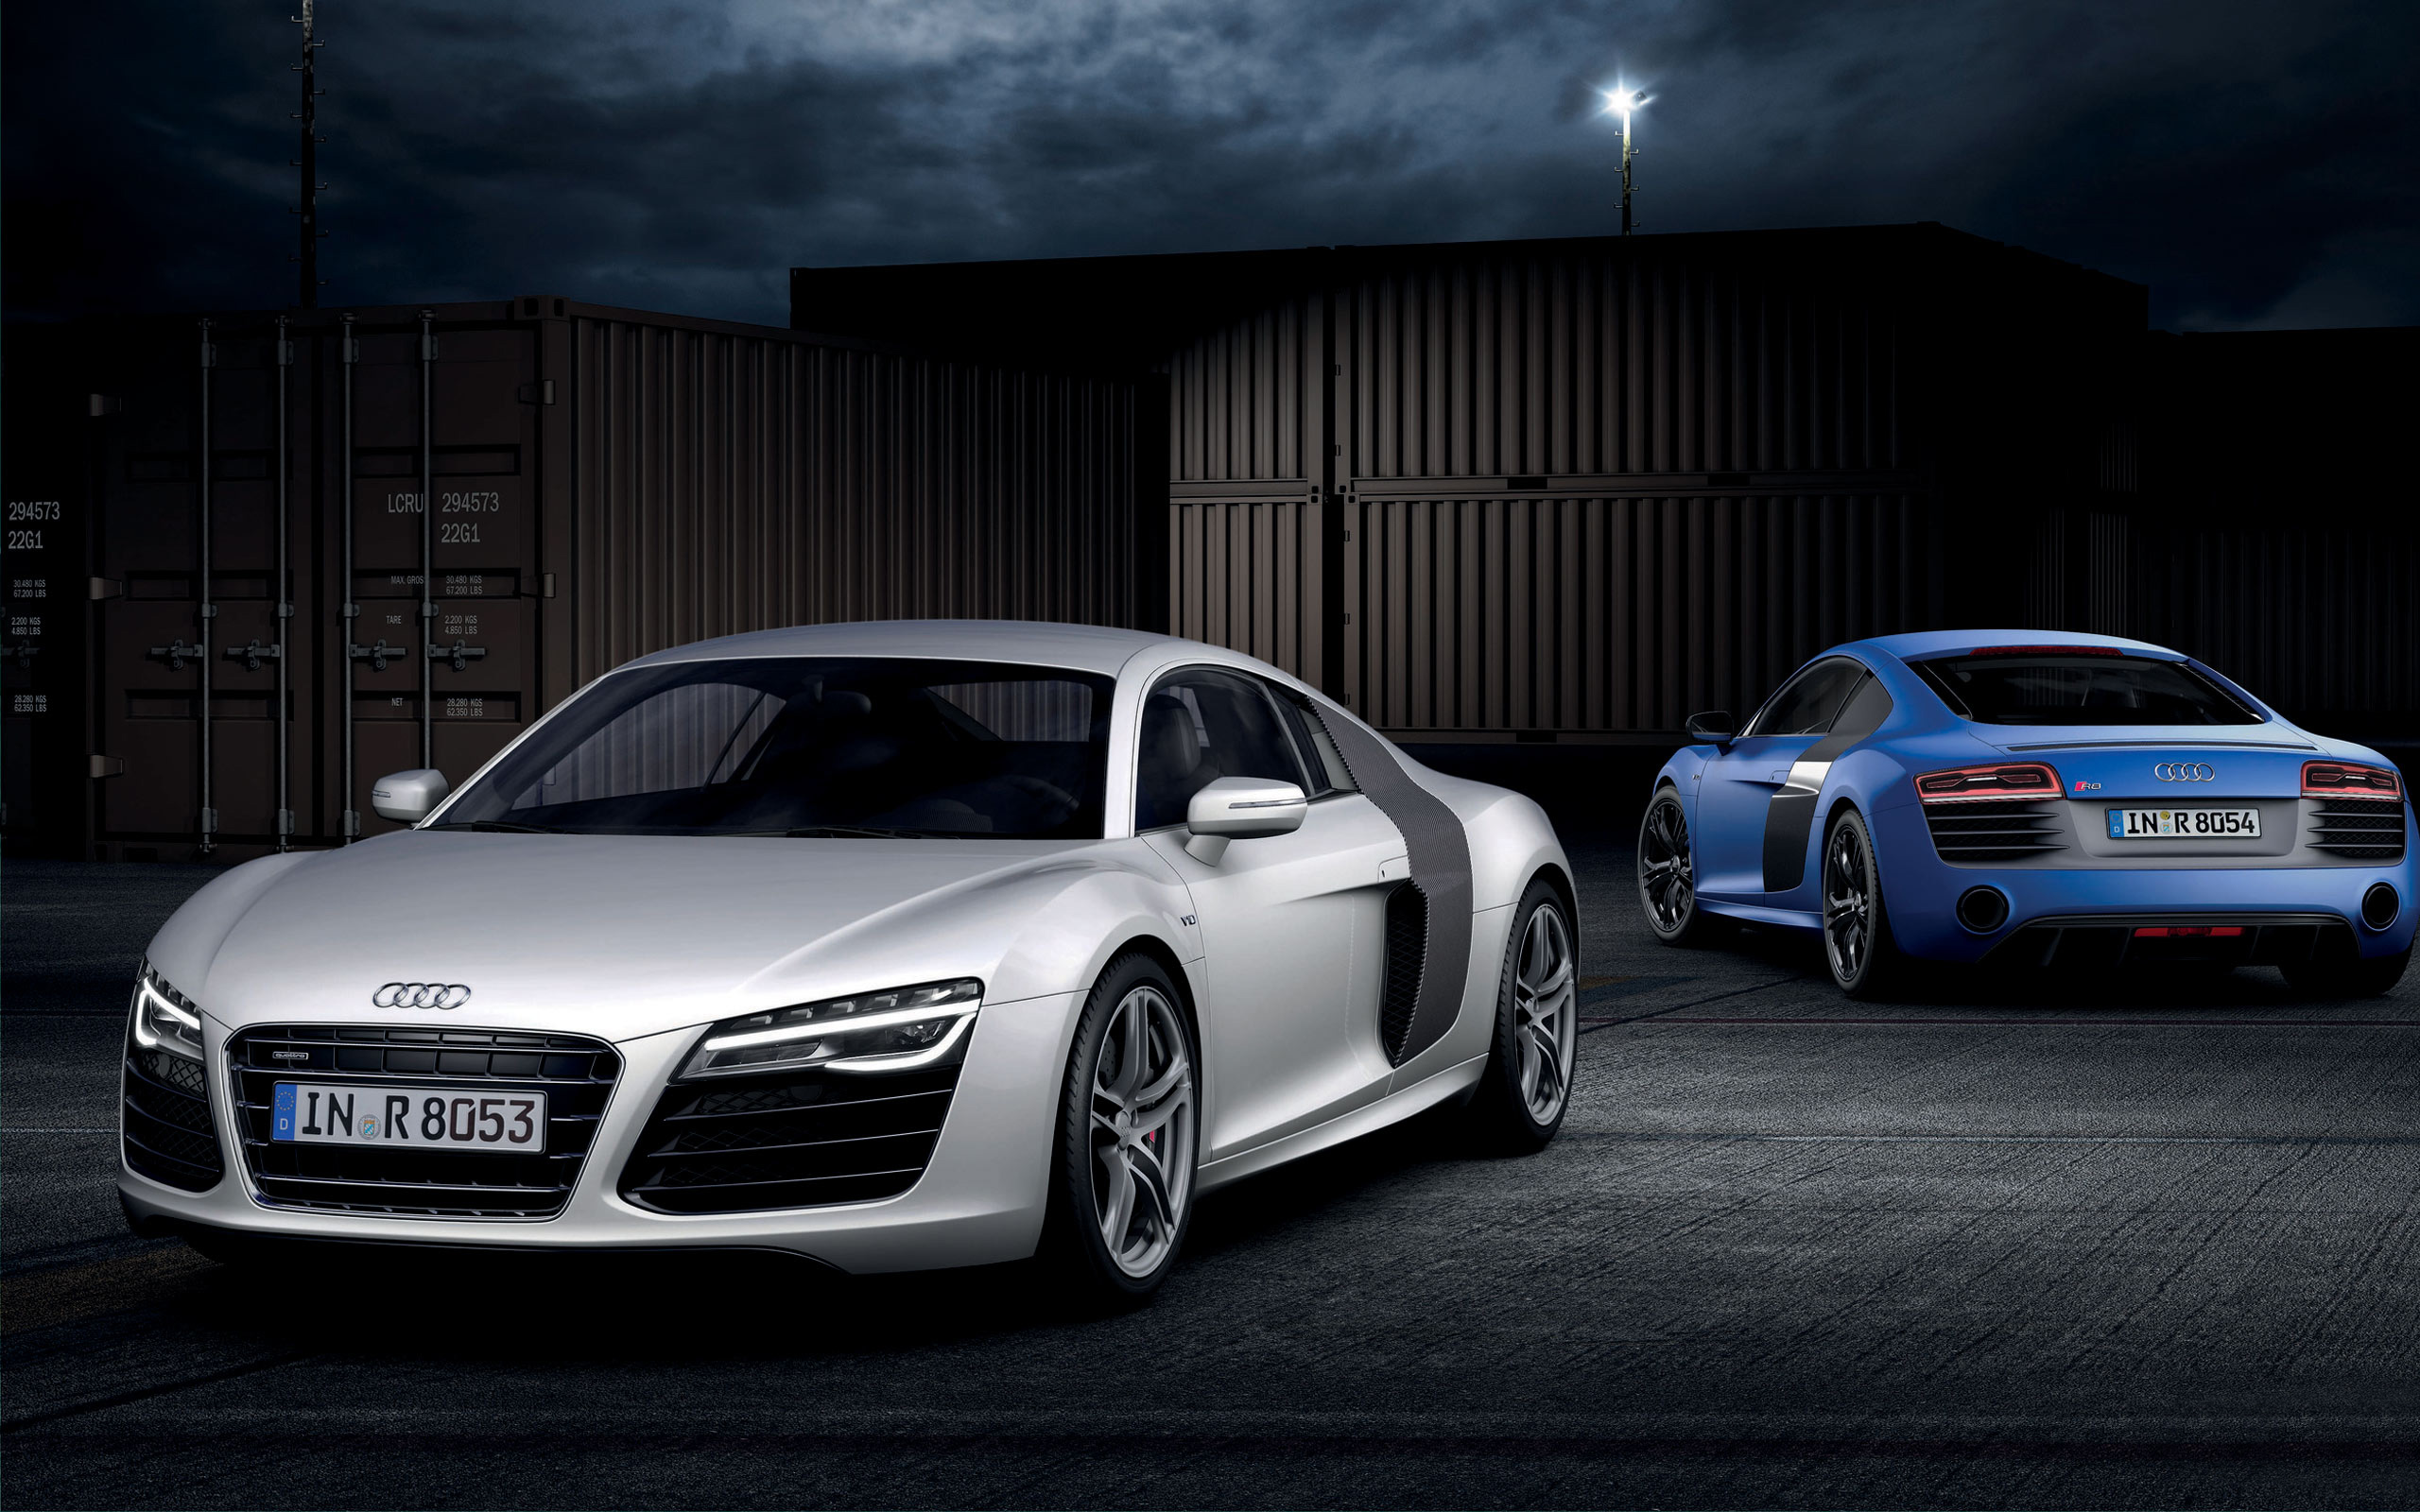 The Ultimate Supercar: Experience The Power Of The 2013 Audi R8 V10 Plus